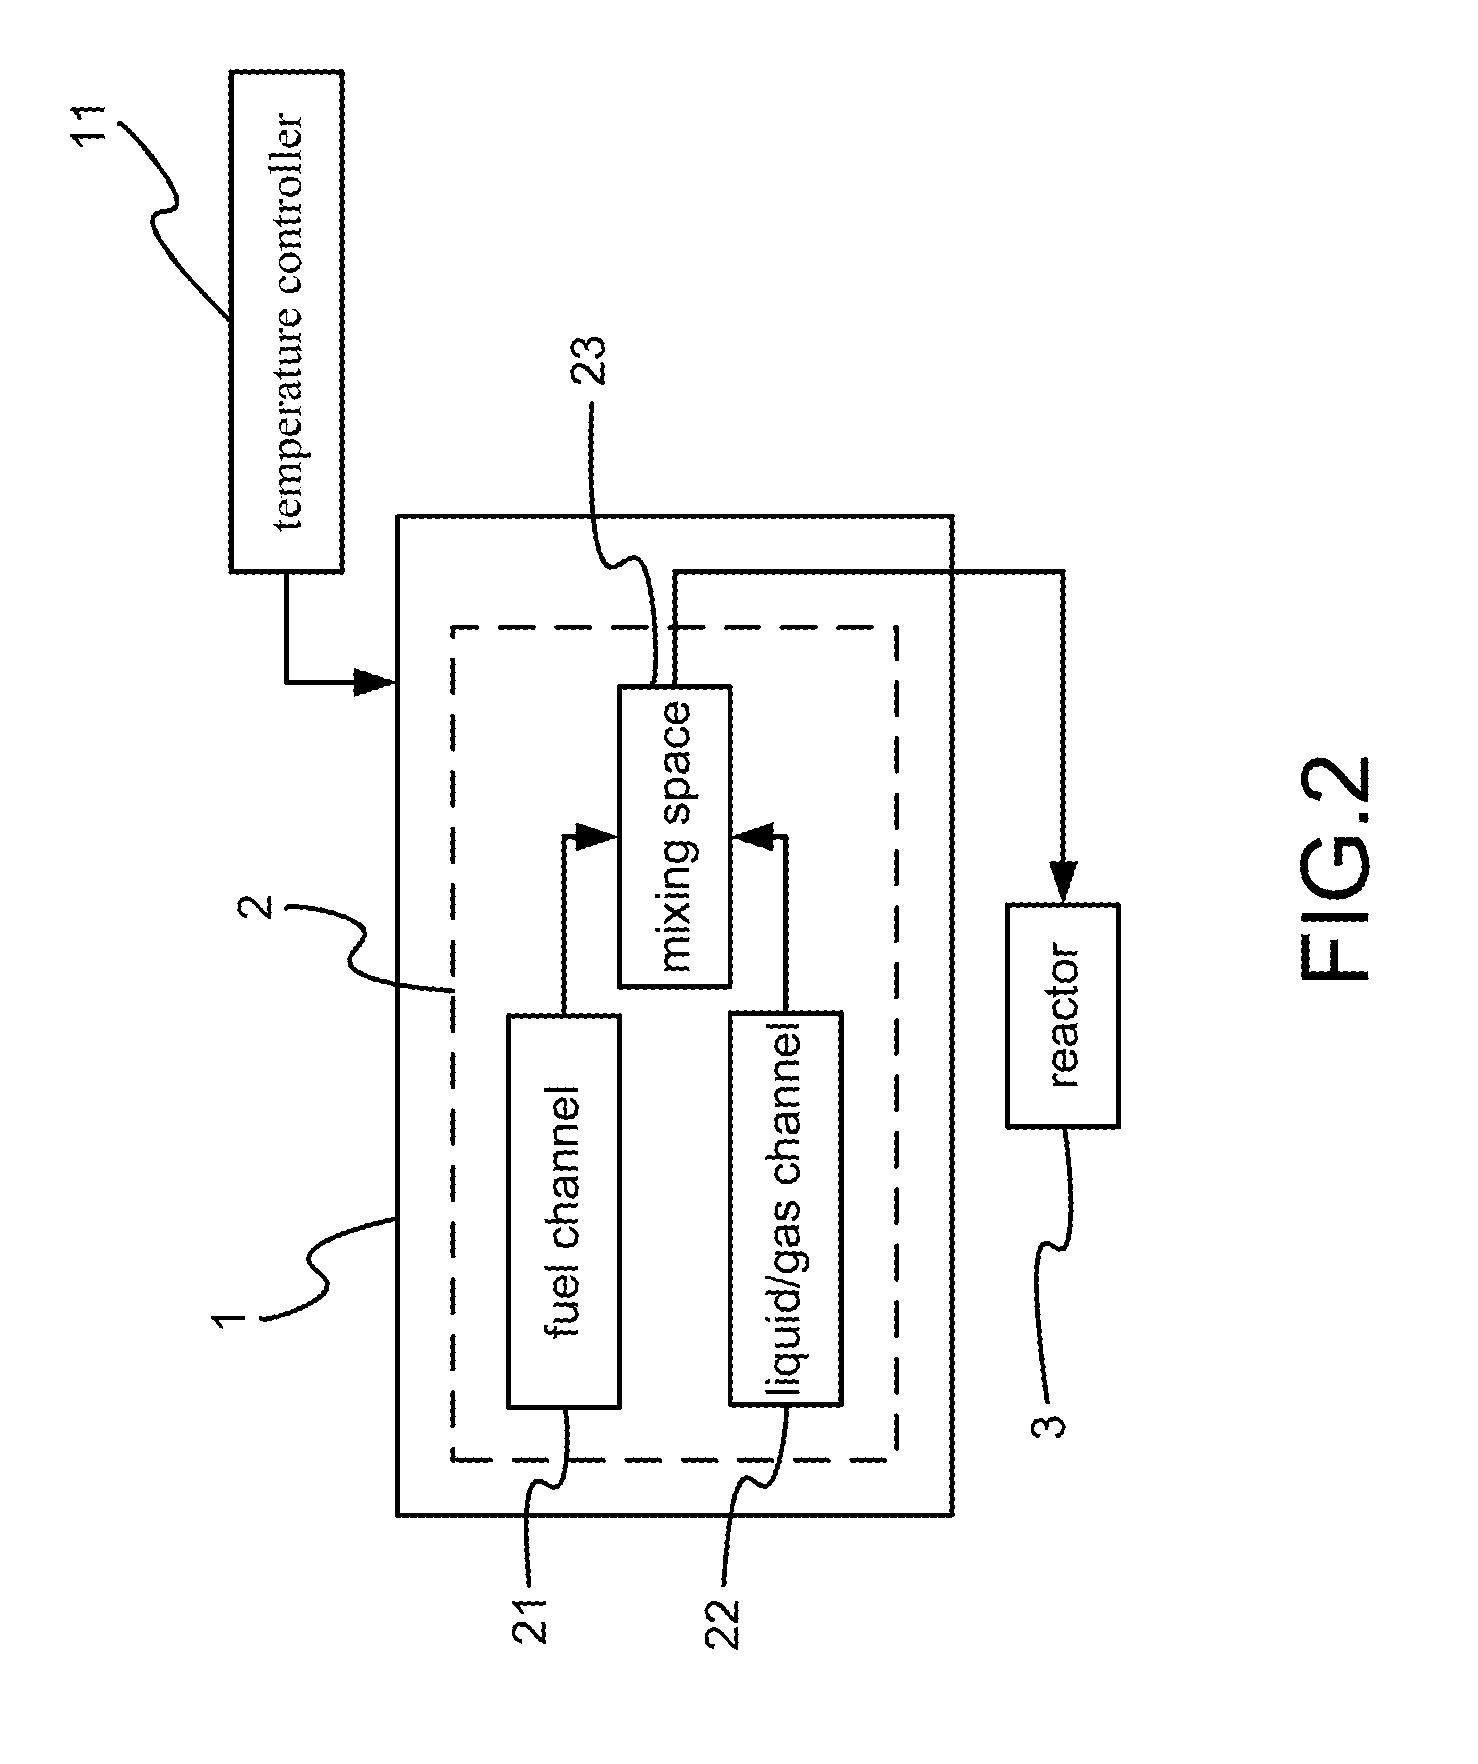 Anti-soot reformer with temperature control